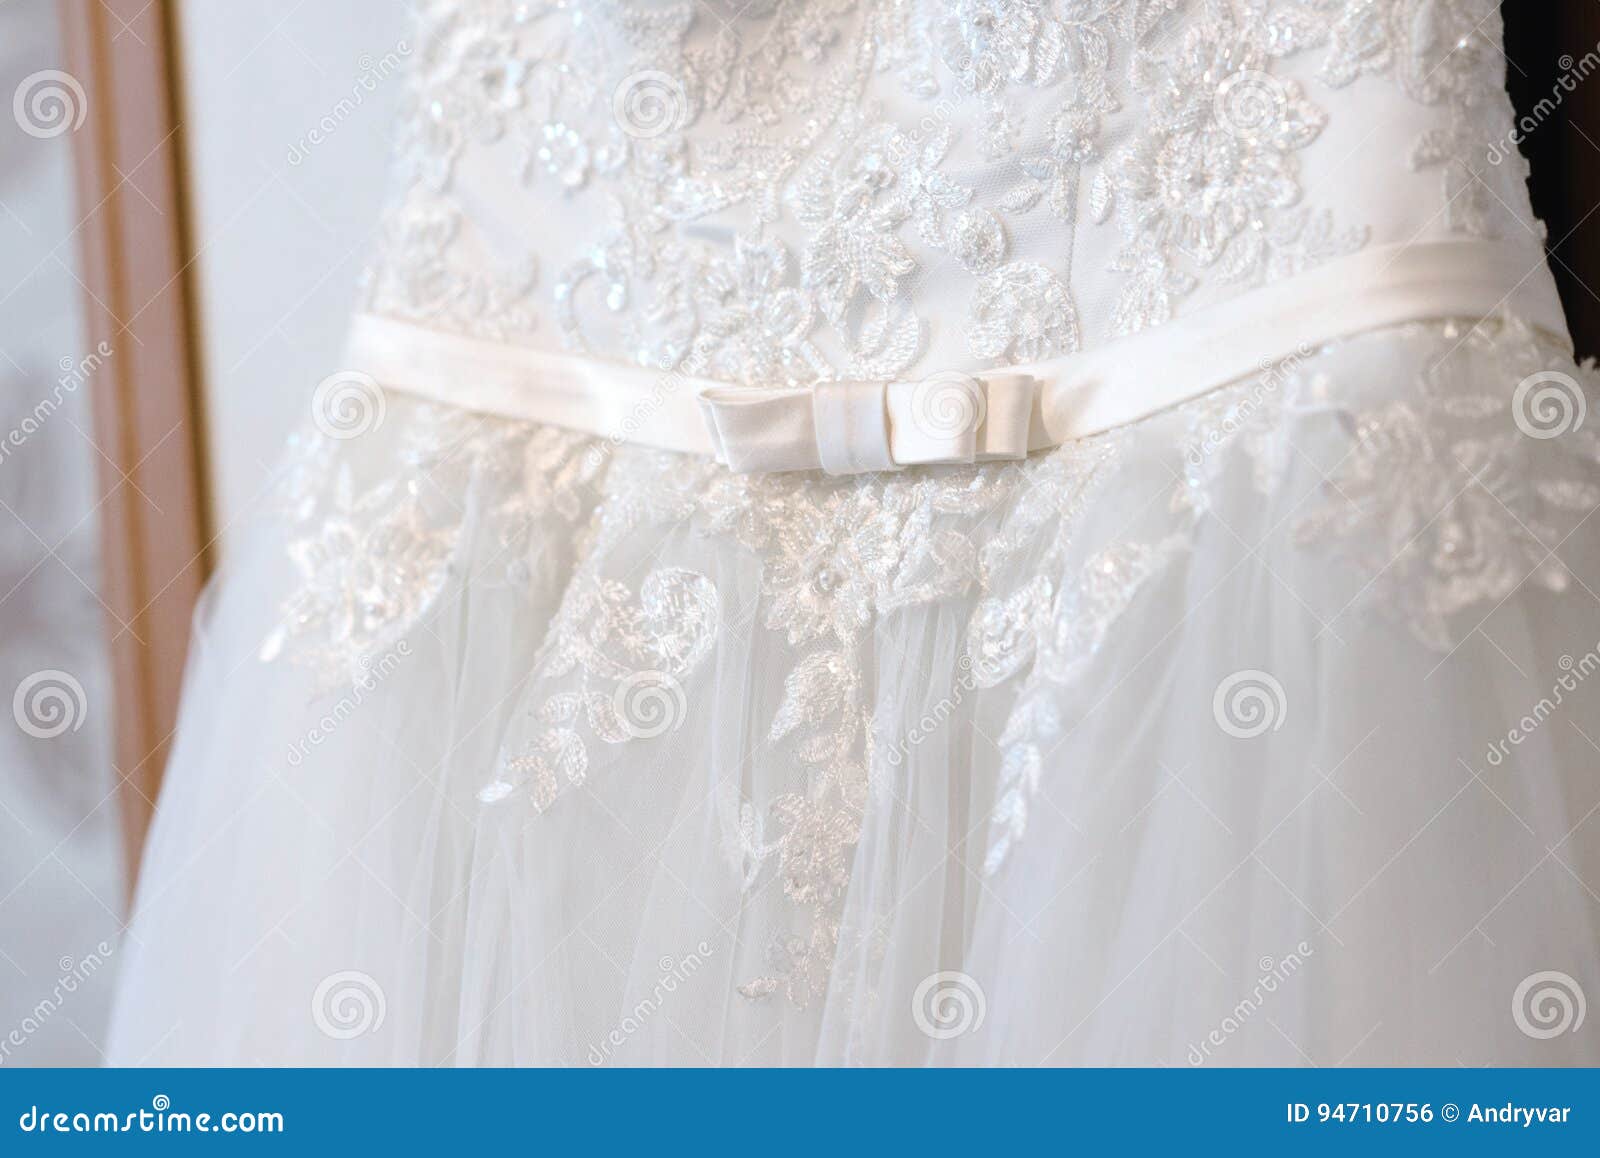 Bride back view stock photo. Image of lady, bridal, adult - 94710756